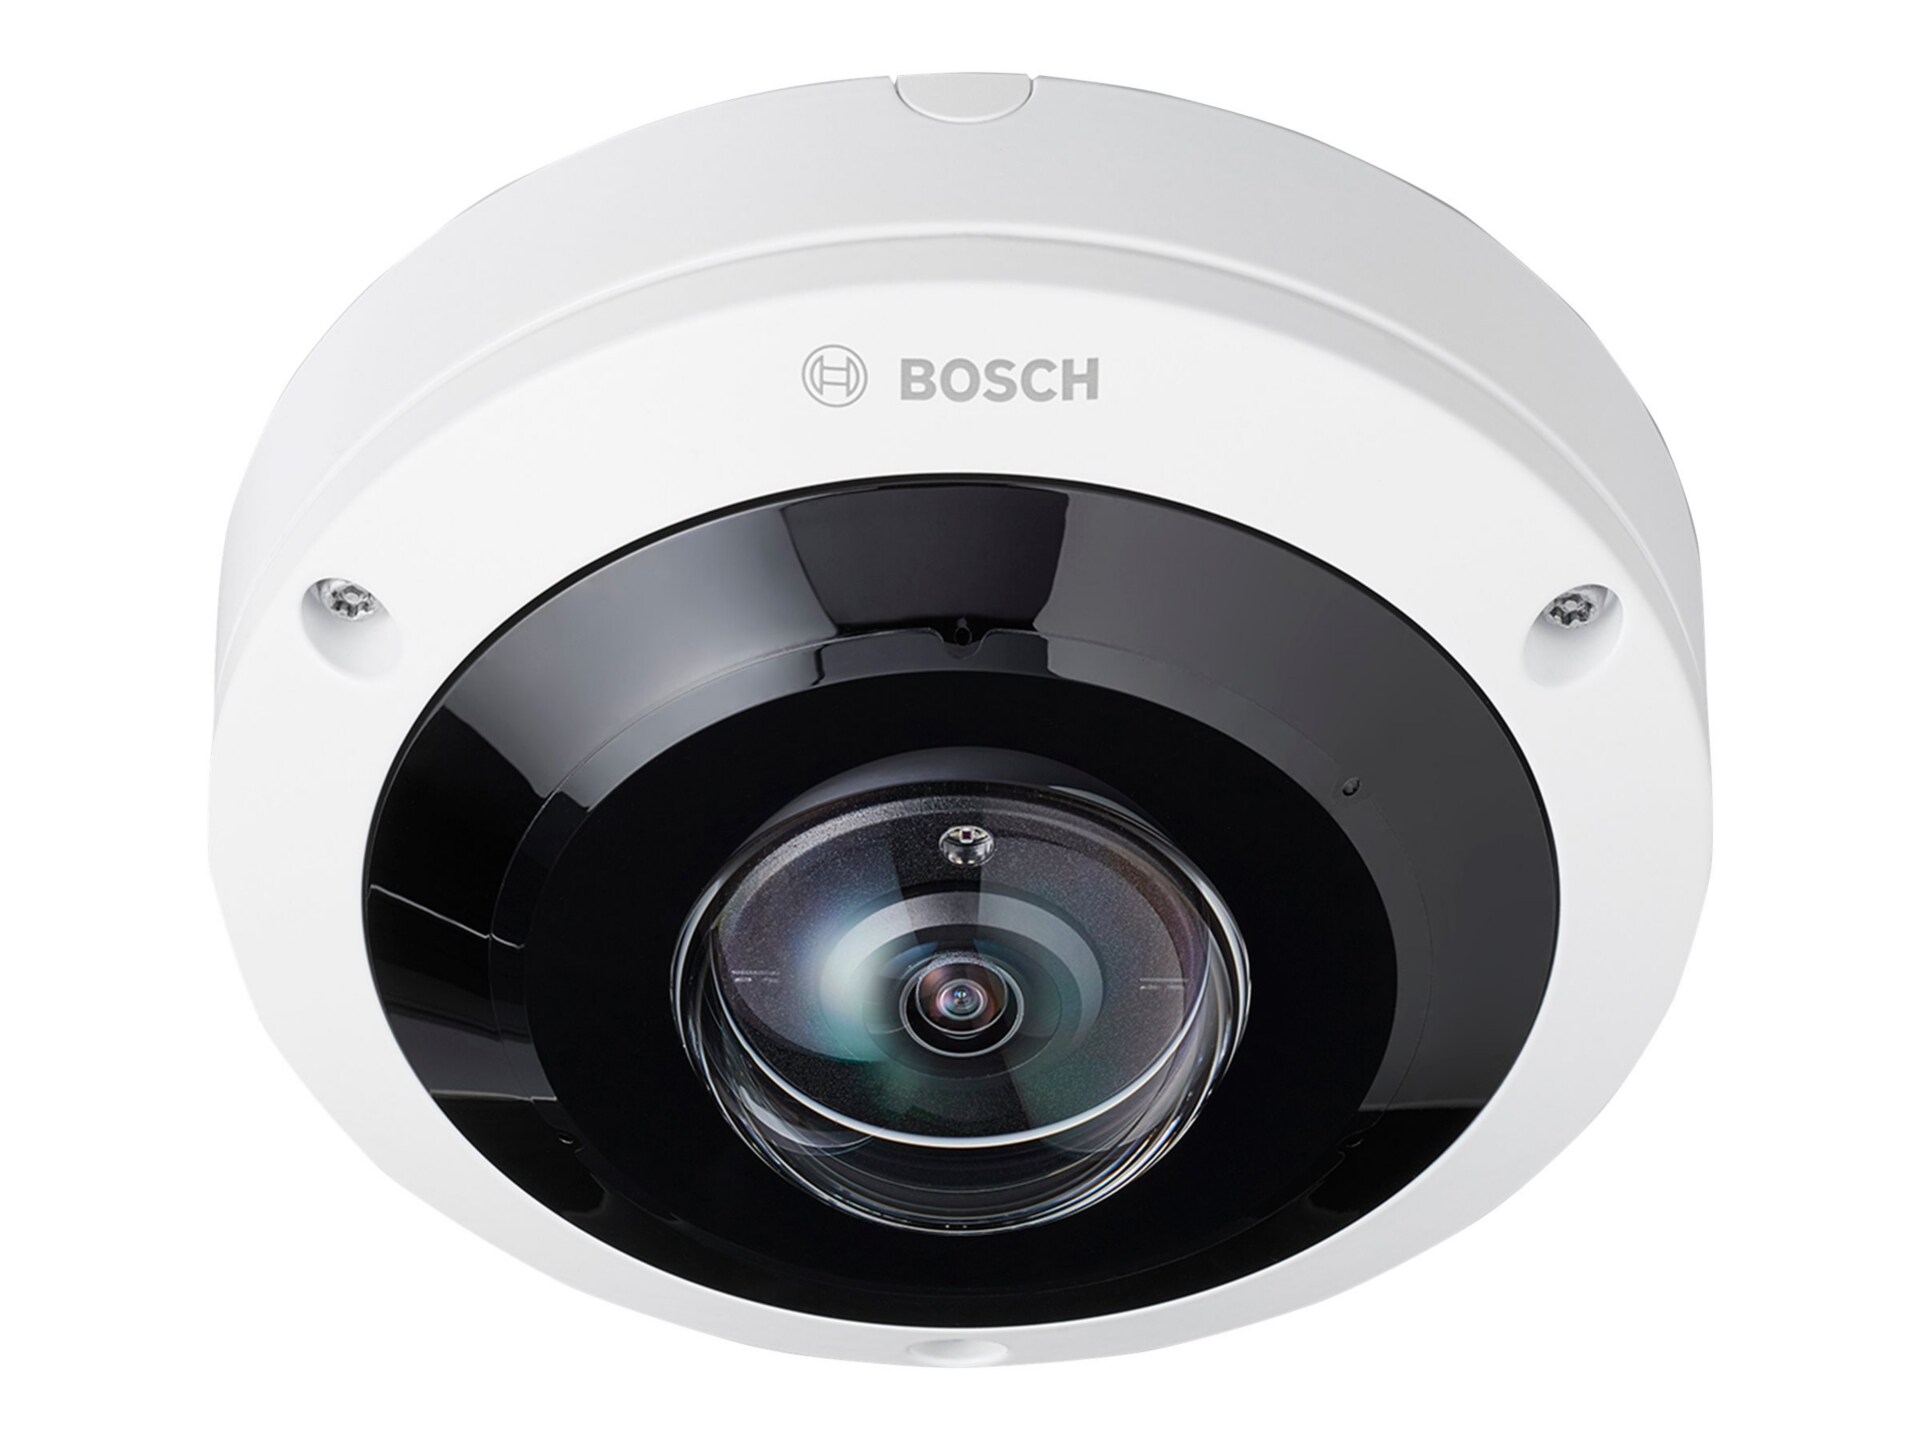 Bosch FLEXIDOME panoramic 5100i IR NDS-5704-F360LE - network surveillance / panoramic camera - dome